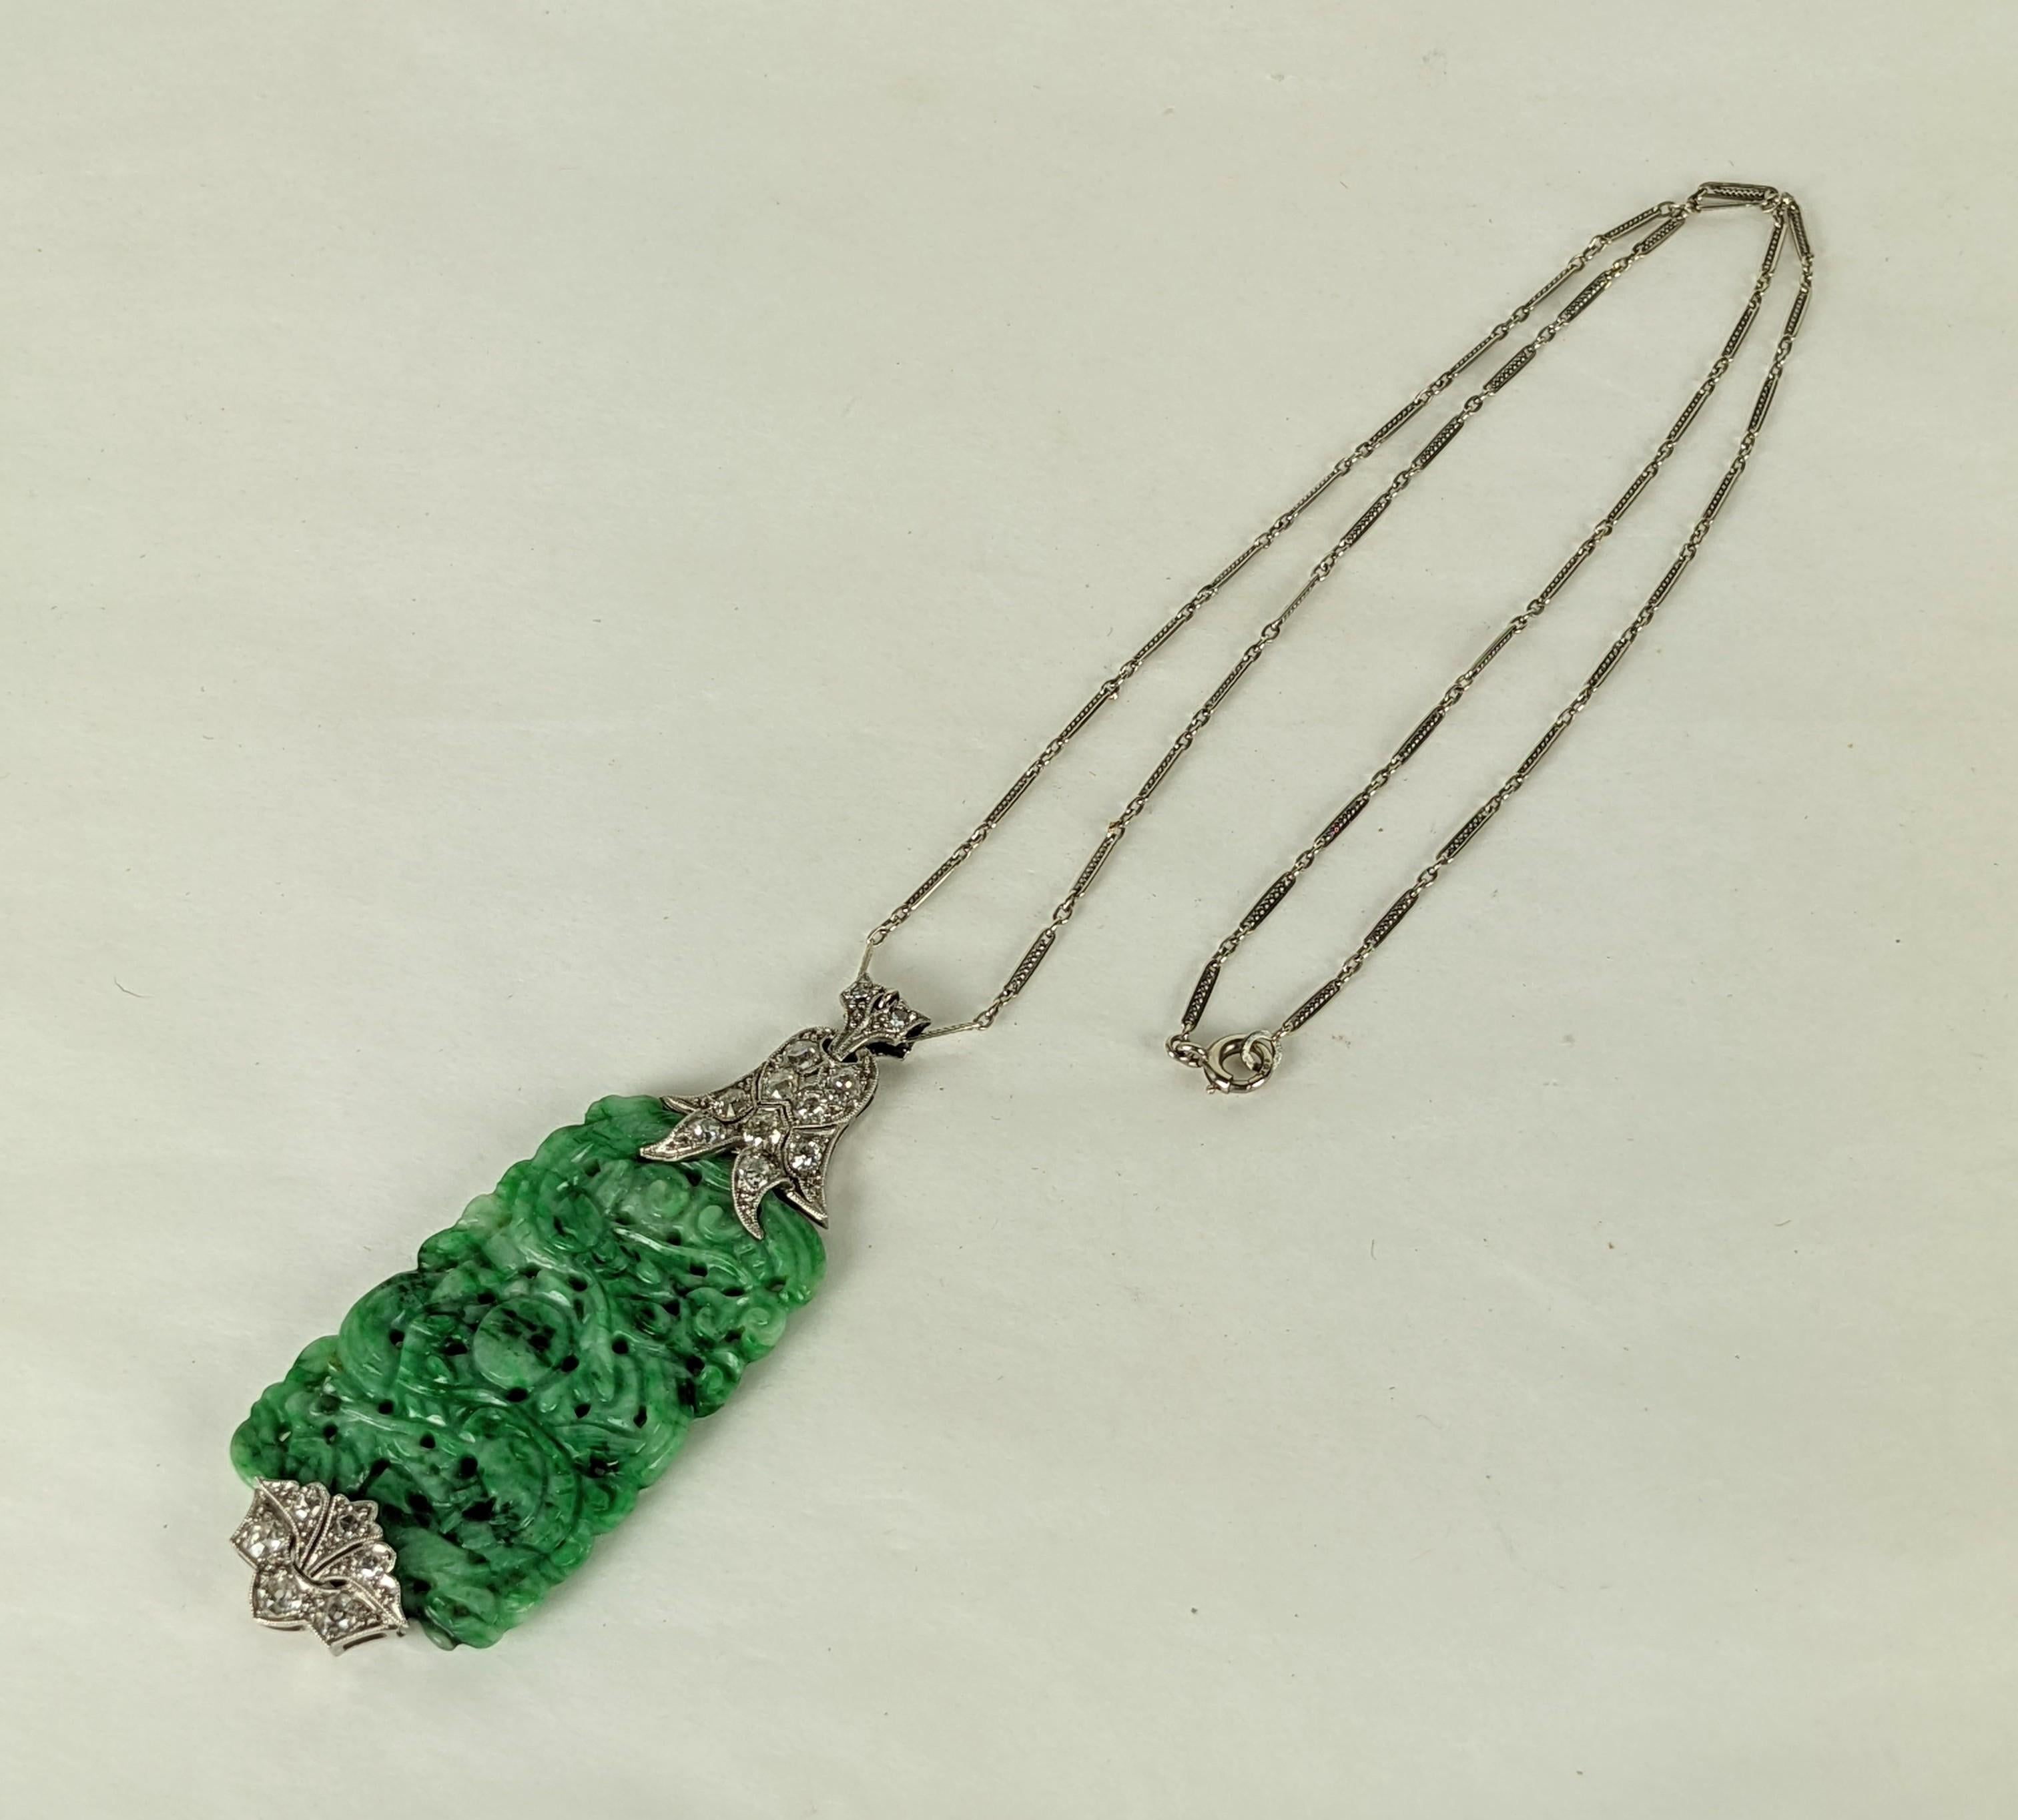 Art Deco Jade Diamond Pendant set in 18k platinum. Antique carved jade panel is held by diamond deco floriform hilts. Bright European cut diamonds throughout. Ornate twisted bar link chain in 18K. 
1930's. Necklace 17